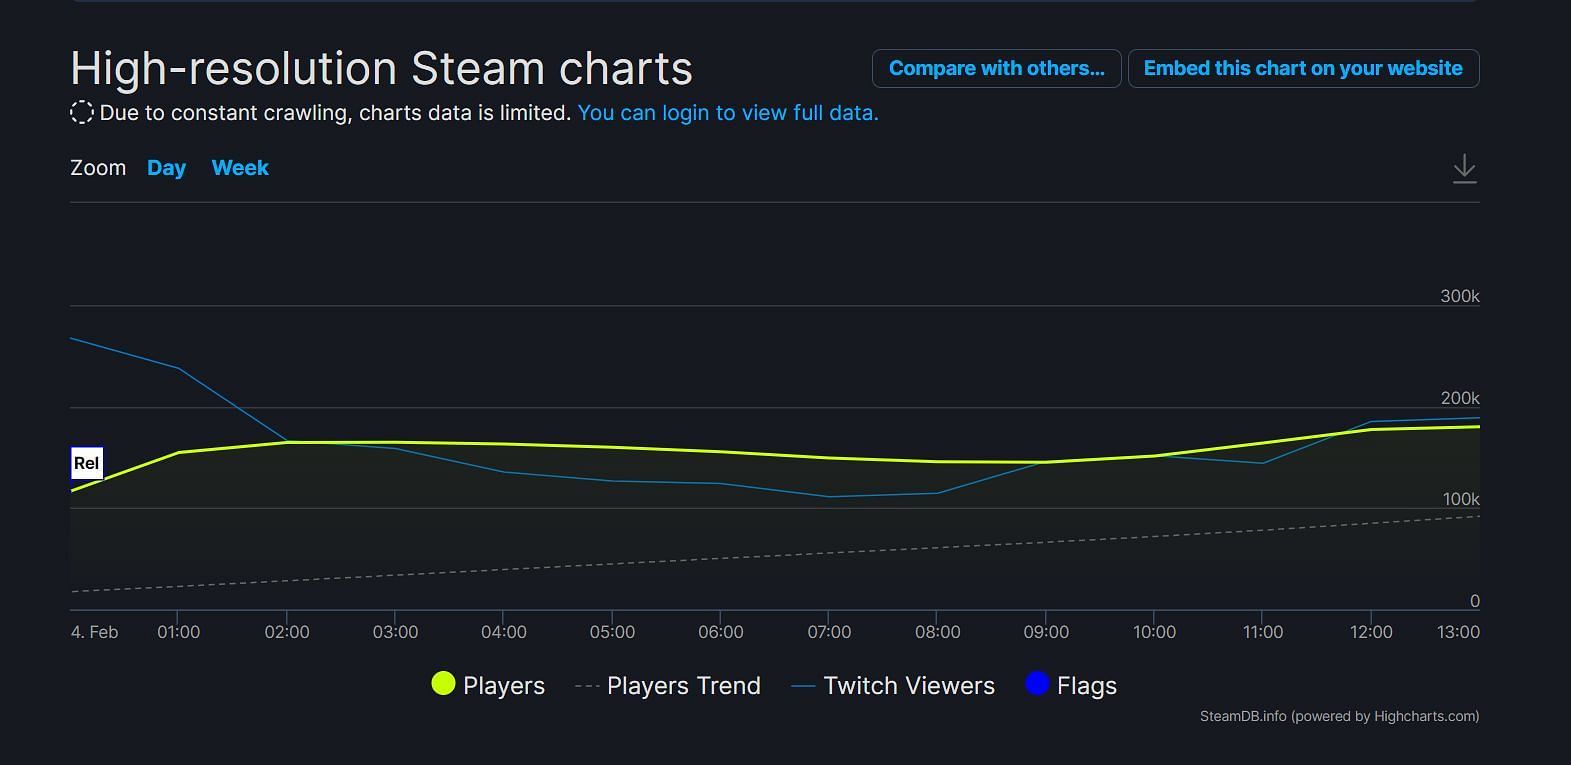 Launch day is looking good for Dying Light 2 (Image via SteamDB)